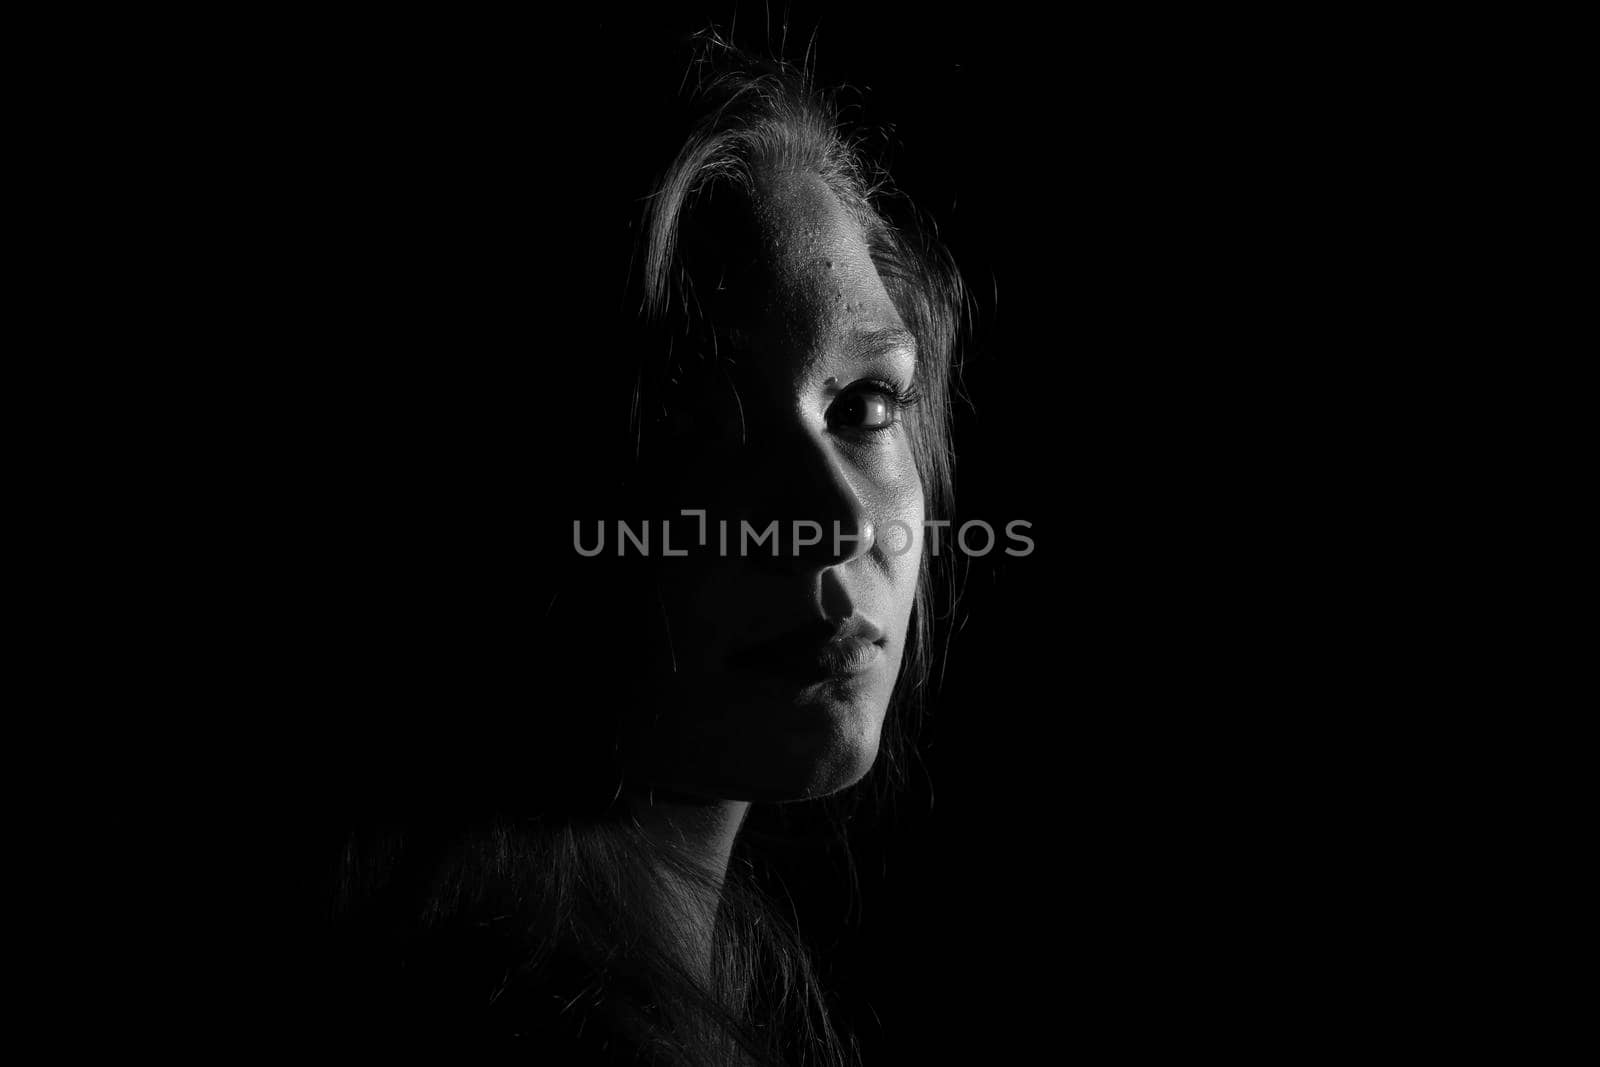 Black and white portrait of an Italian young woman on black background